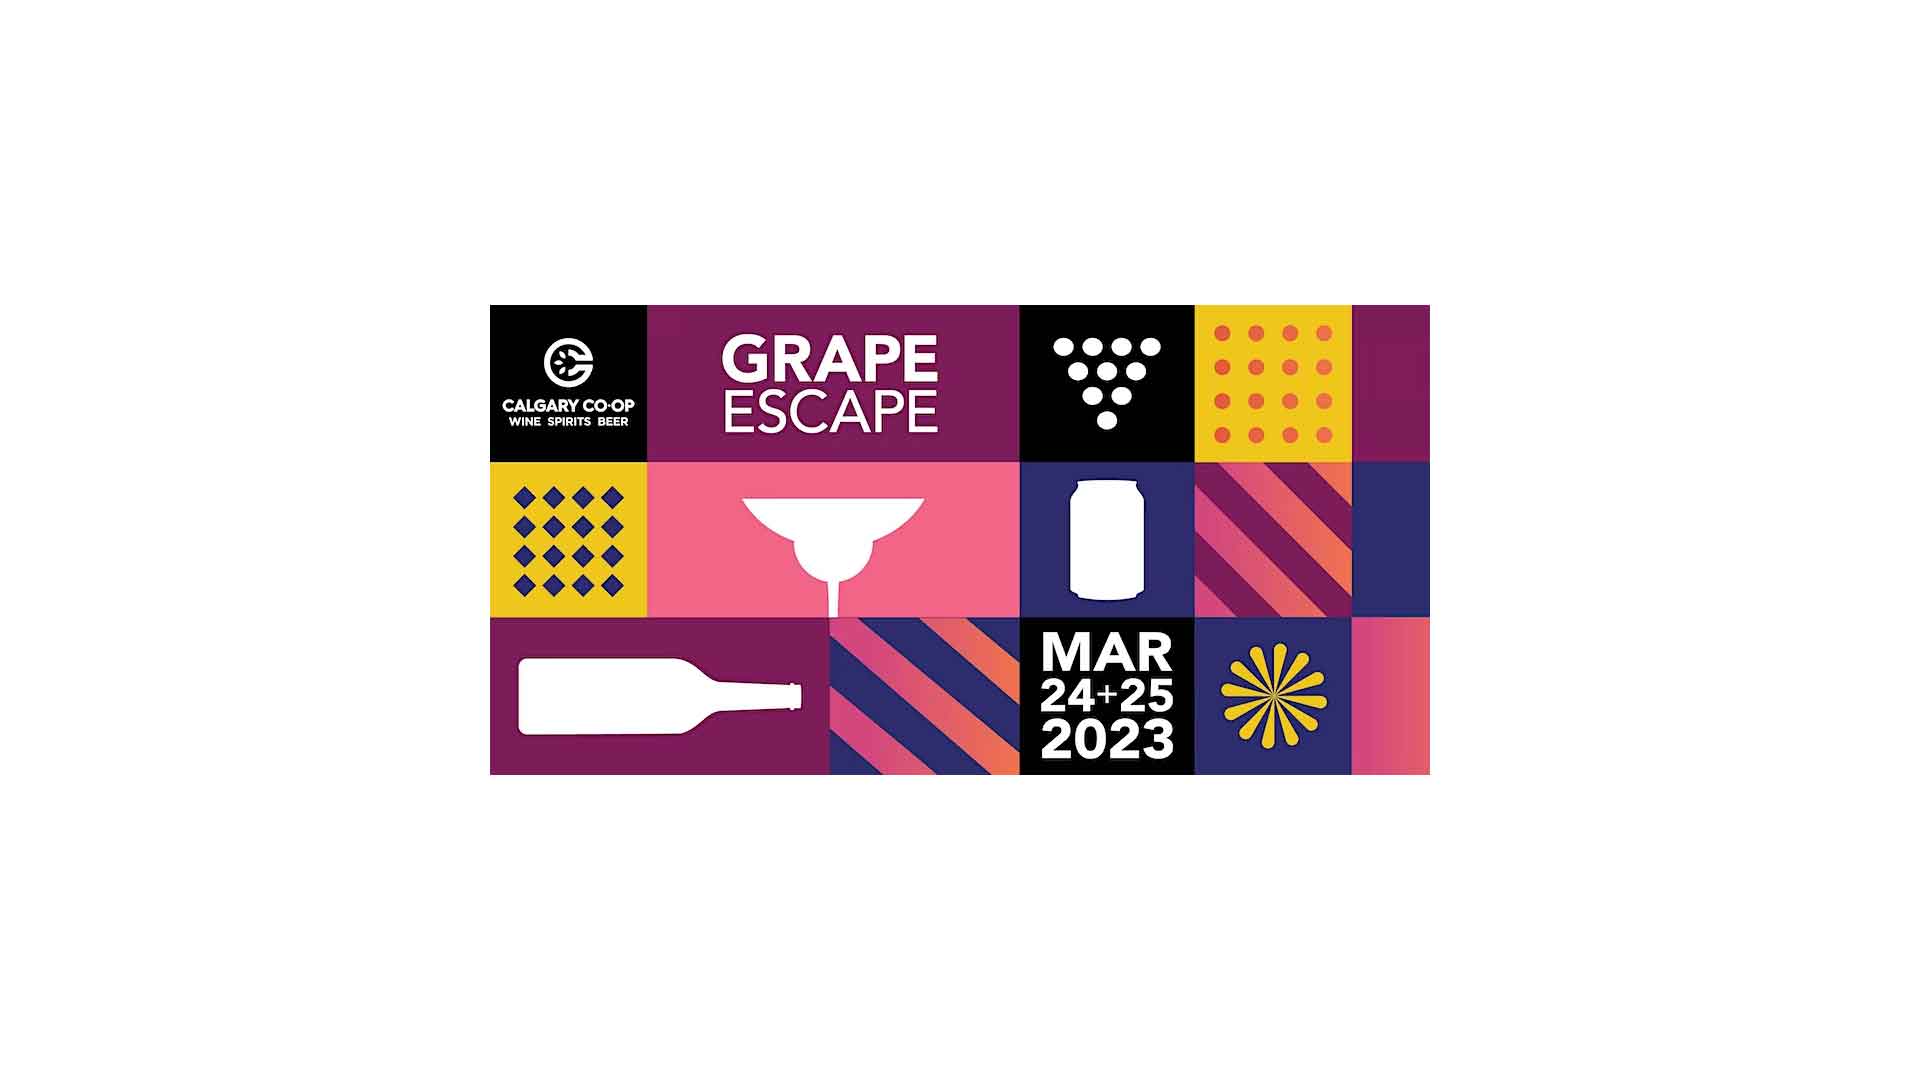 Calgary Co-Op Wine, Spirits, Beers: The Great Escape Event Image